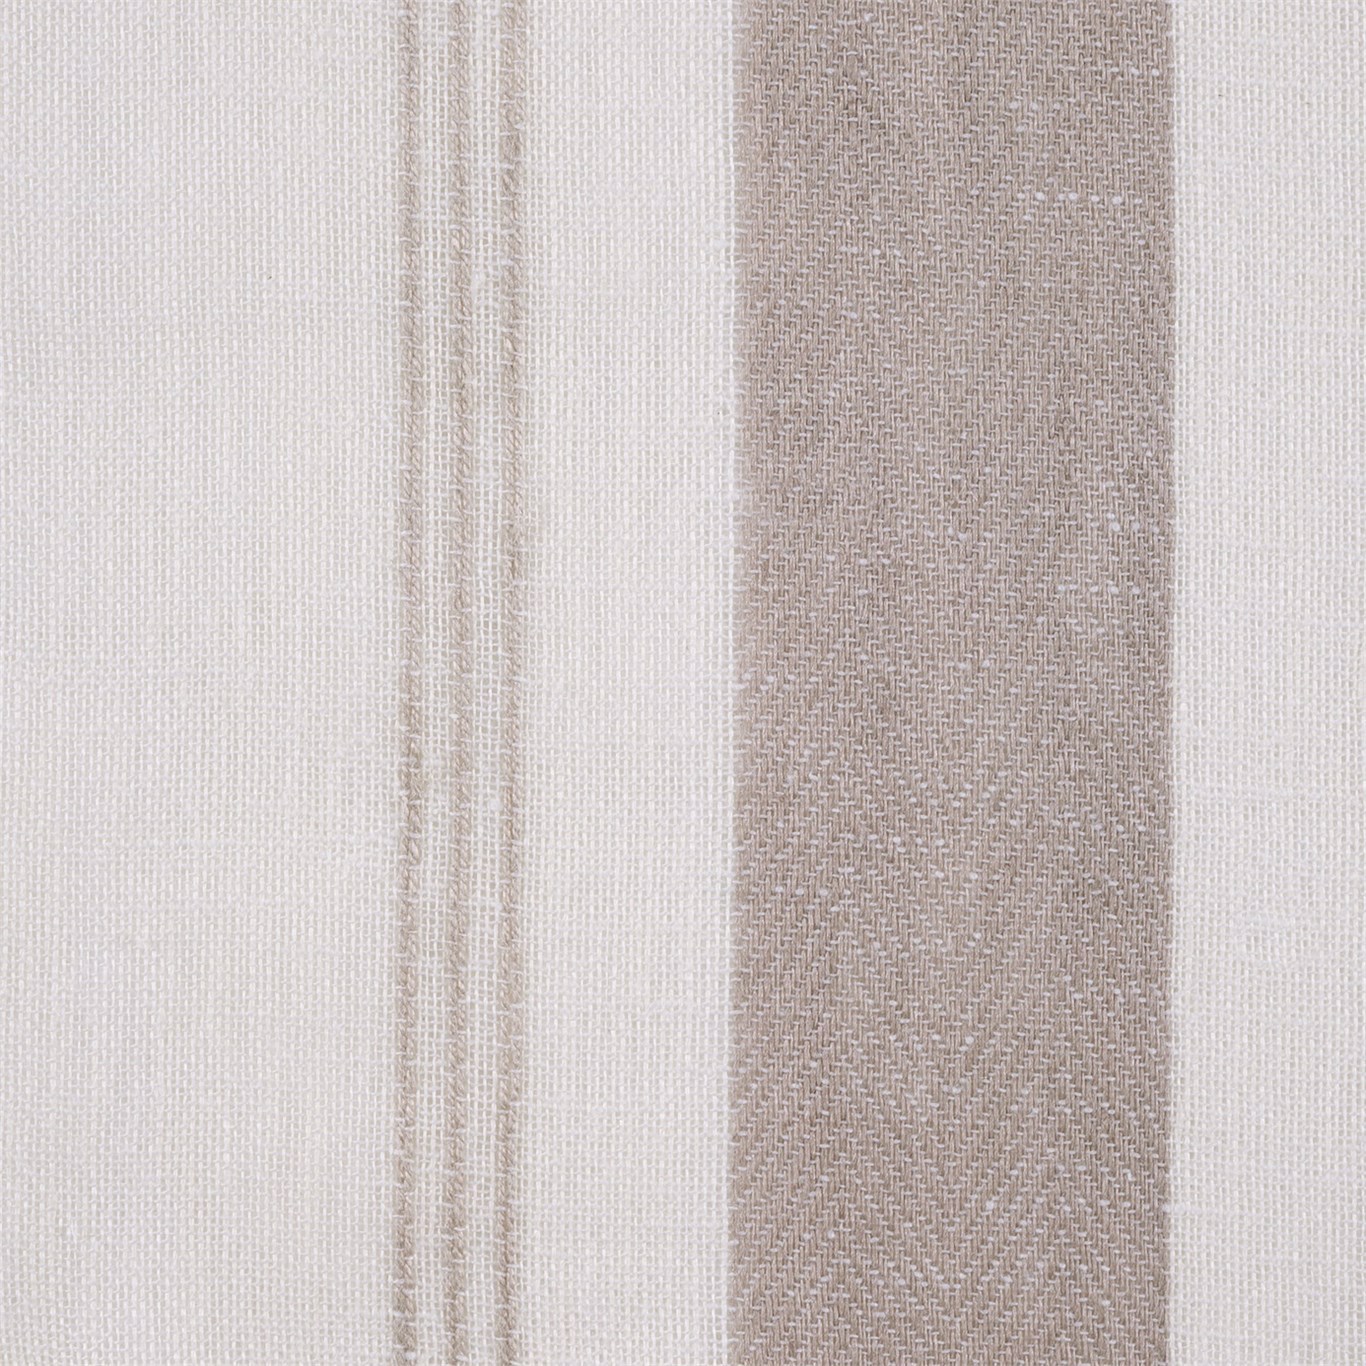 Purity Voiles Stone/Ivory Fabric by HAR